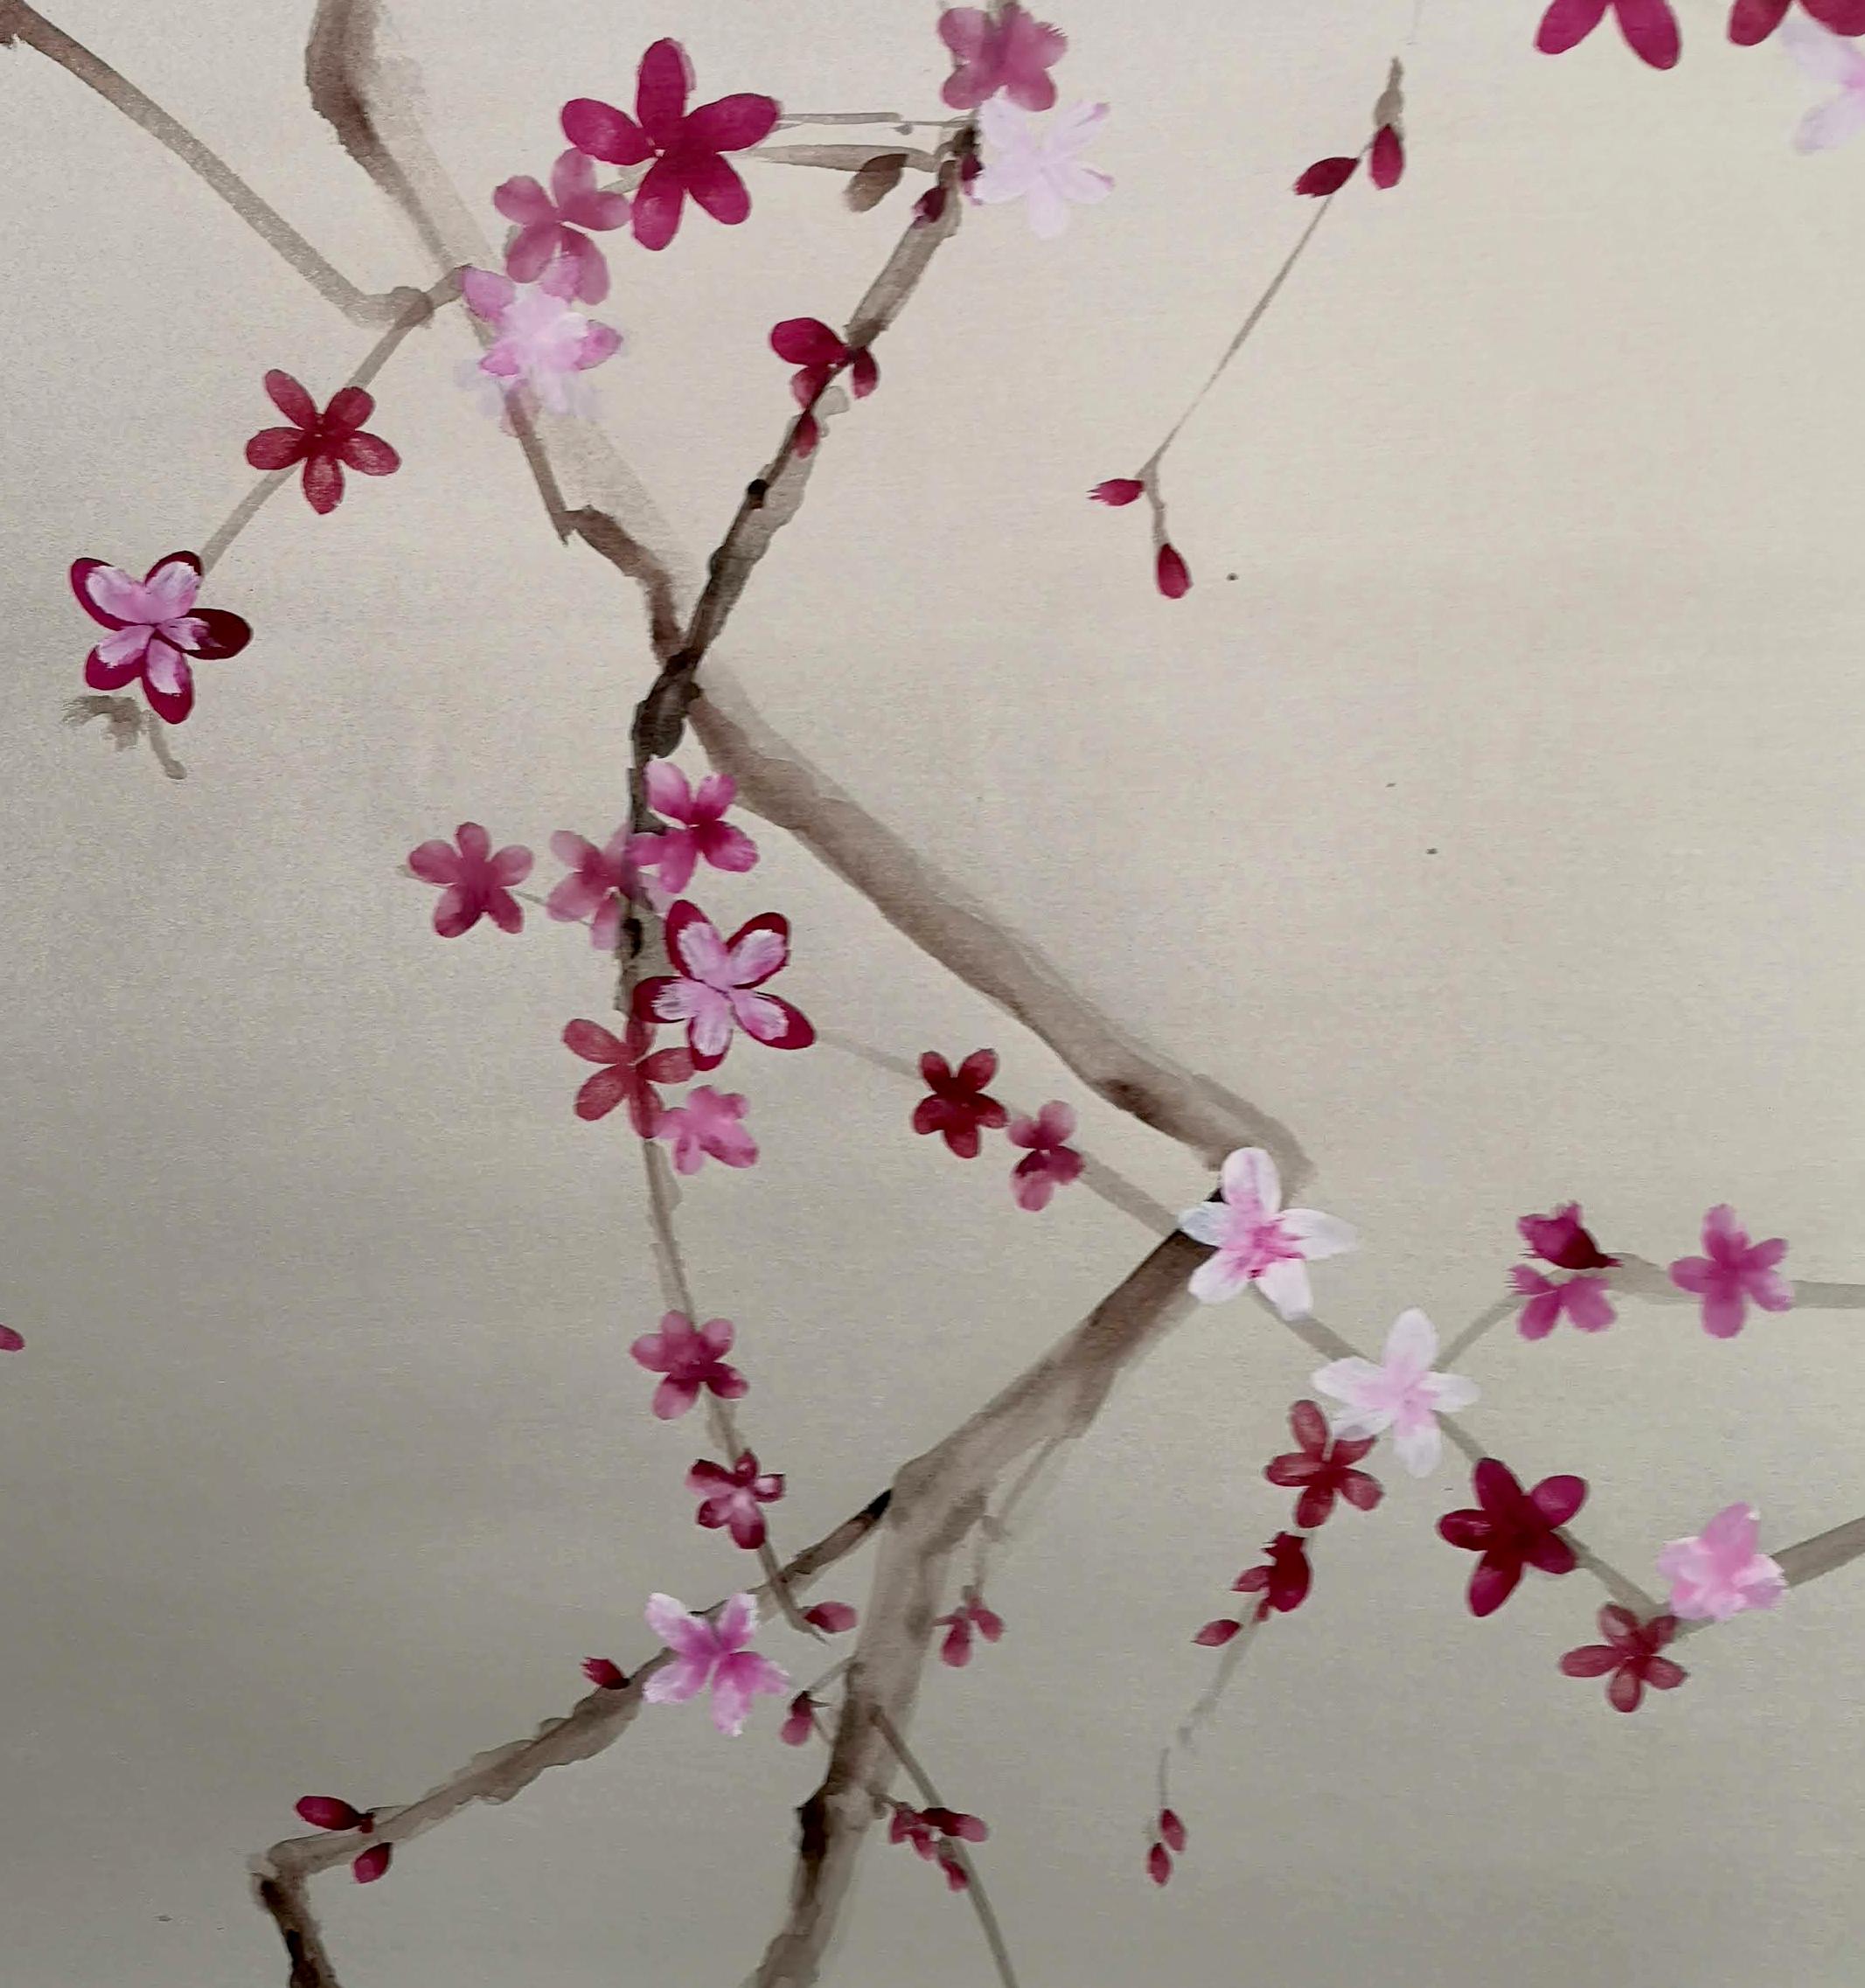 A work consisting of three panels representing a plum blossom, to achieve this delicate effect the sumi-e technique has been used. The work has been entirely hand painted on 100% natural cotton paper, hand lacquered with a metallic base, based on